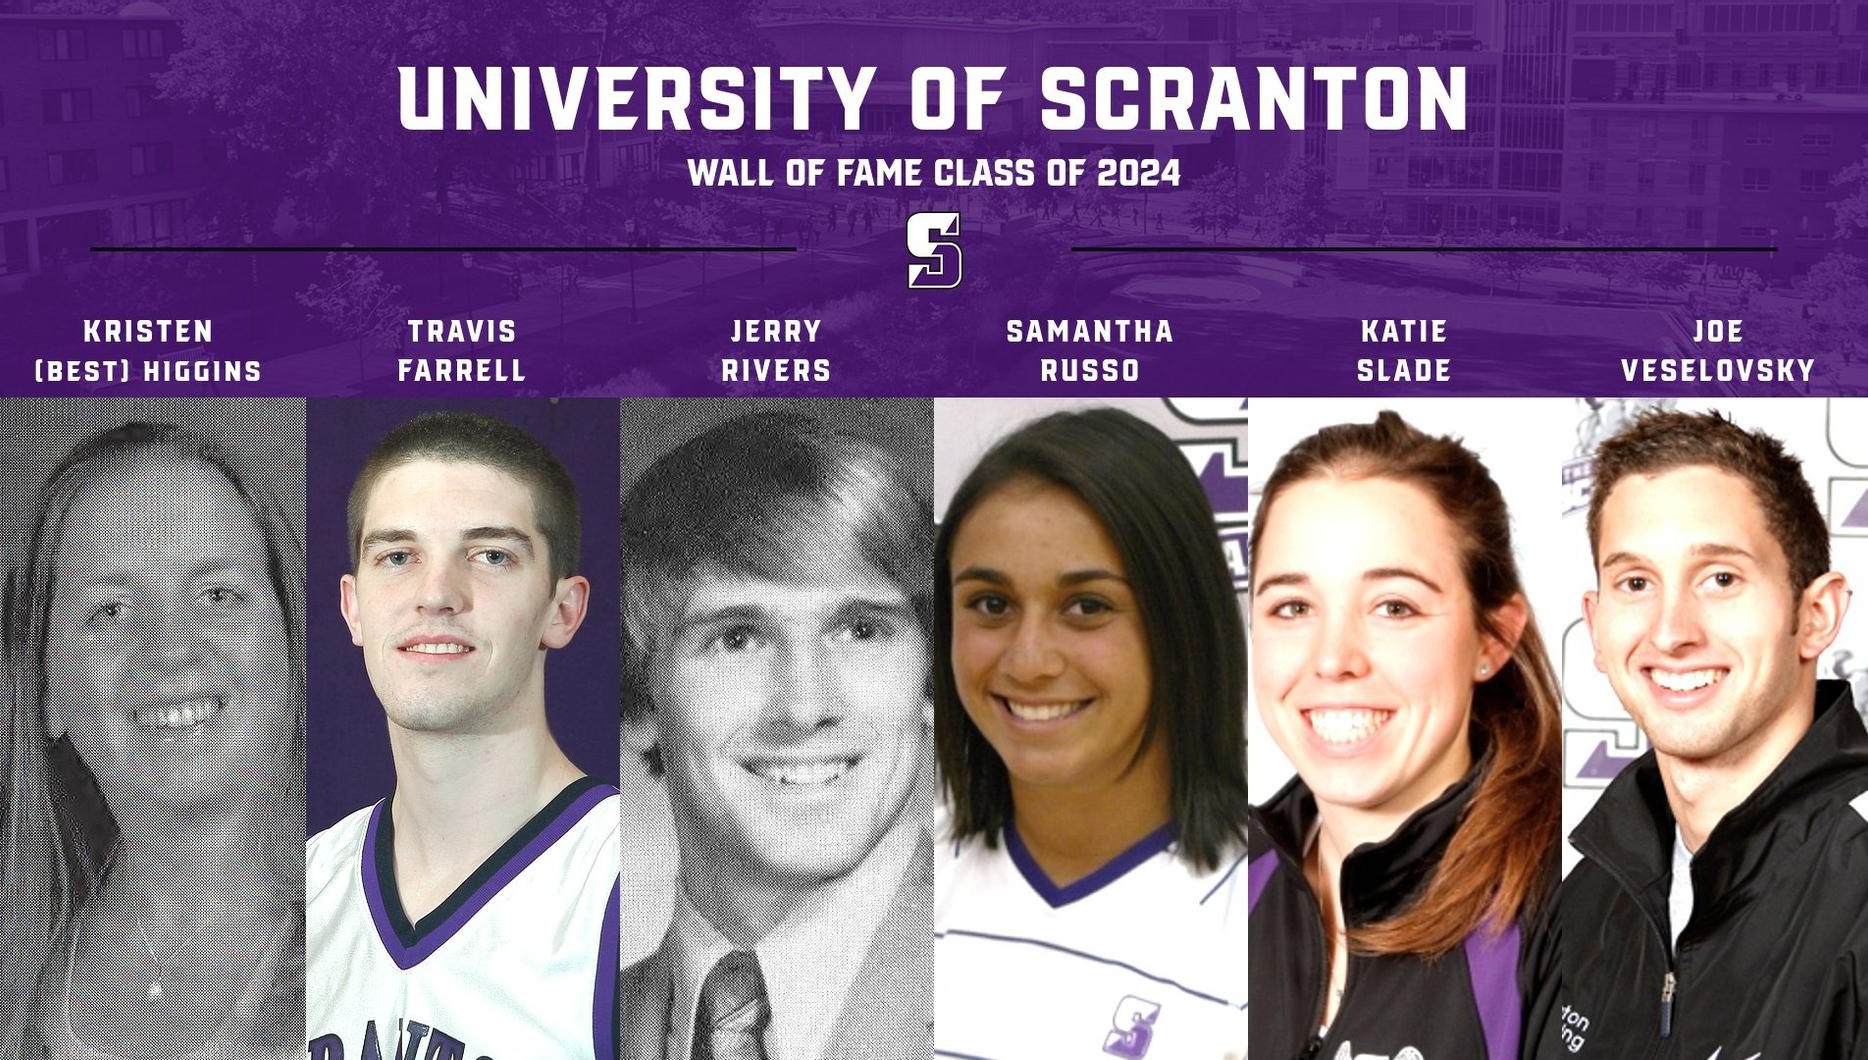 University To Induct Wall of Fame Class of 2024 Feb. 3